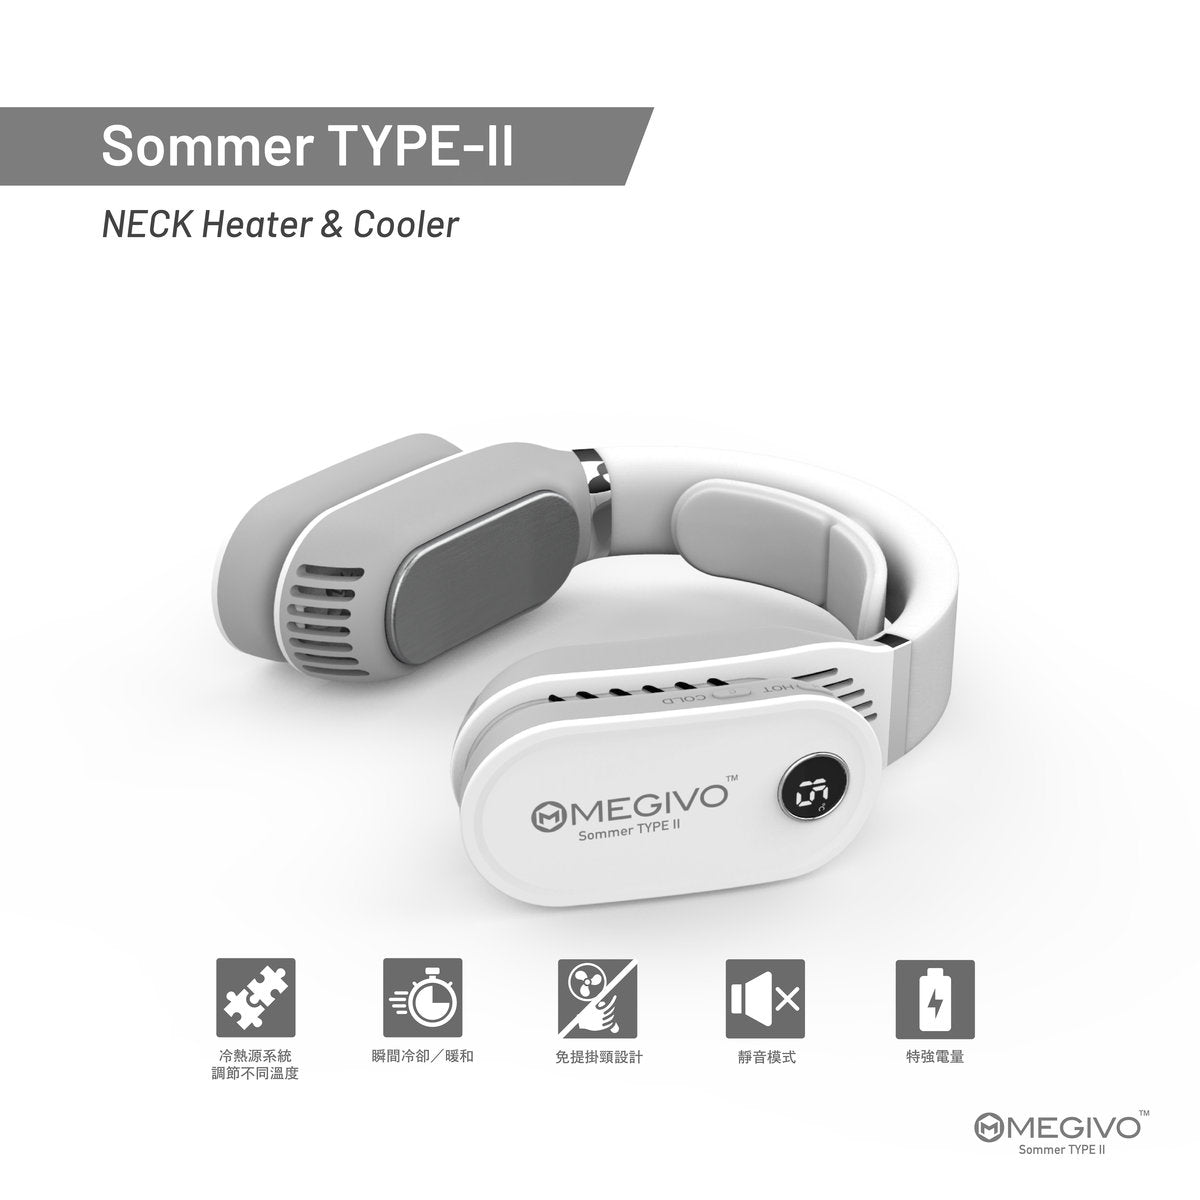 Megivo - Sommer TYPE-II All-Weather Thermostat | Neck Cooler | Mobile Air Conditioner - Silver